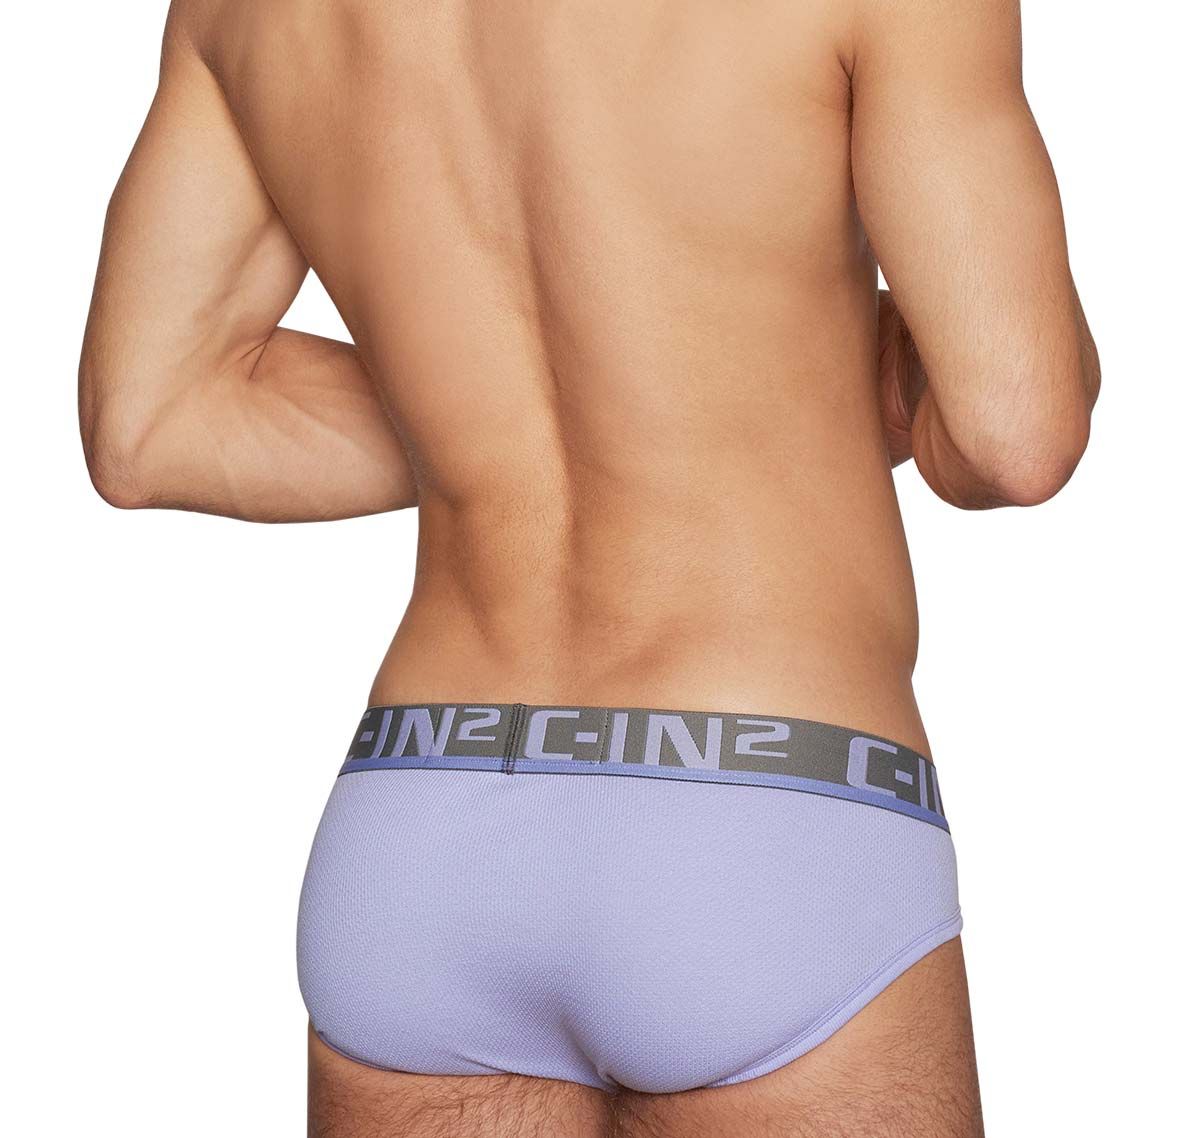 C-IN2 Brief C-Theory LOW RISE BRIEF 8013-451B, purple